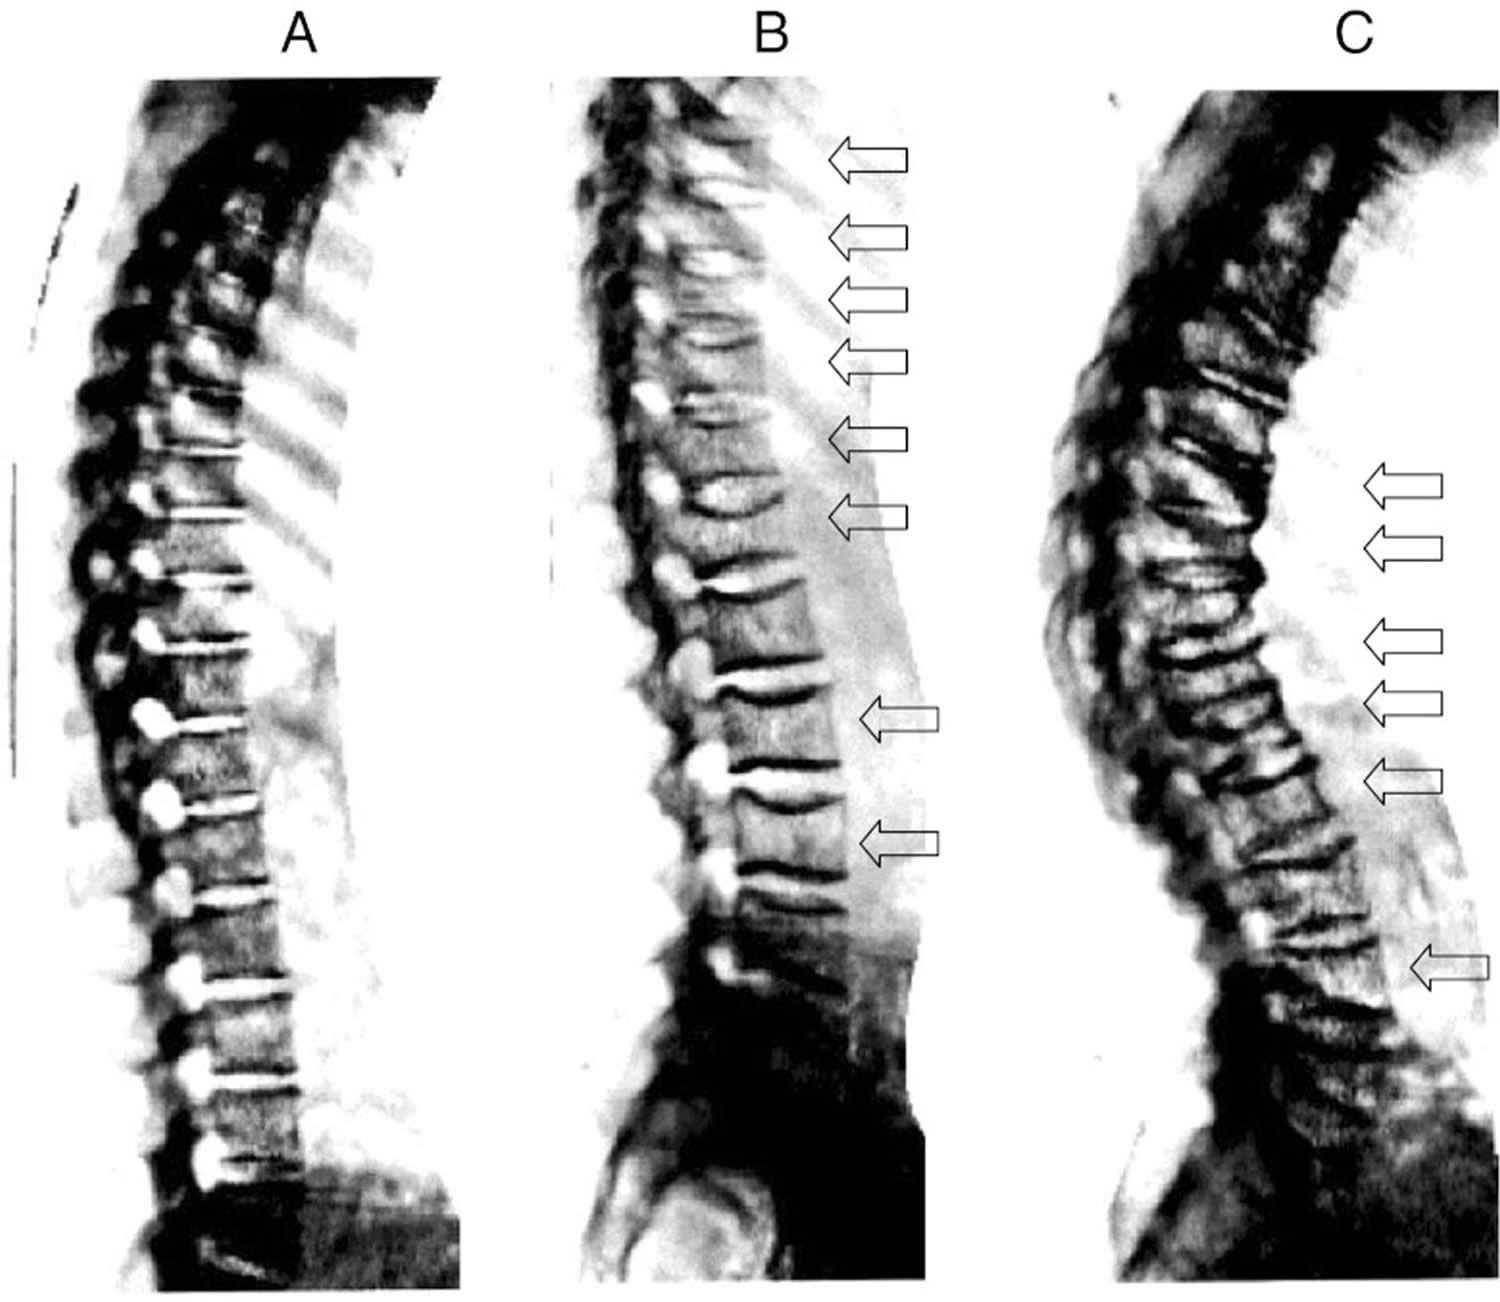 Spine x-rays showing severe compression fractures due to osteoporosis